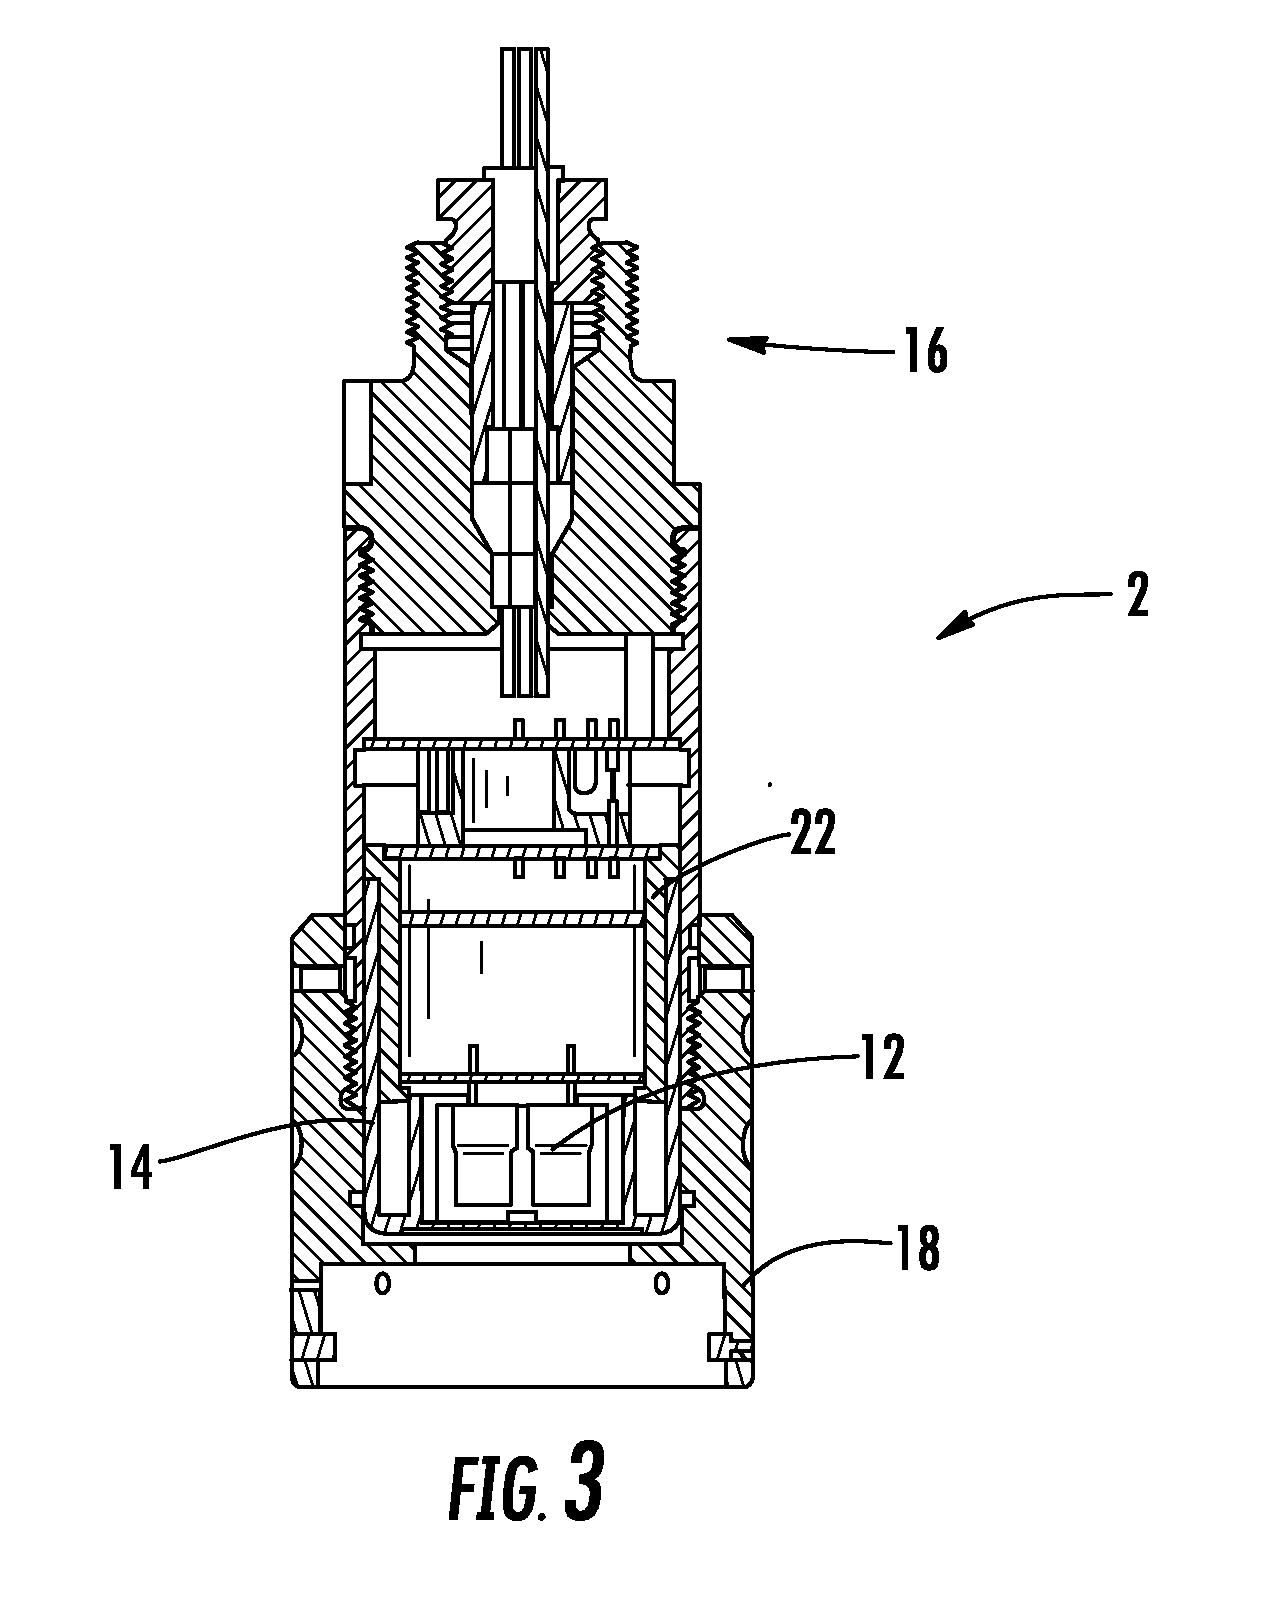 System and method for automatically adjusting gas sensor settings and parameters